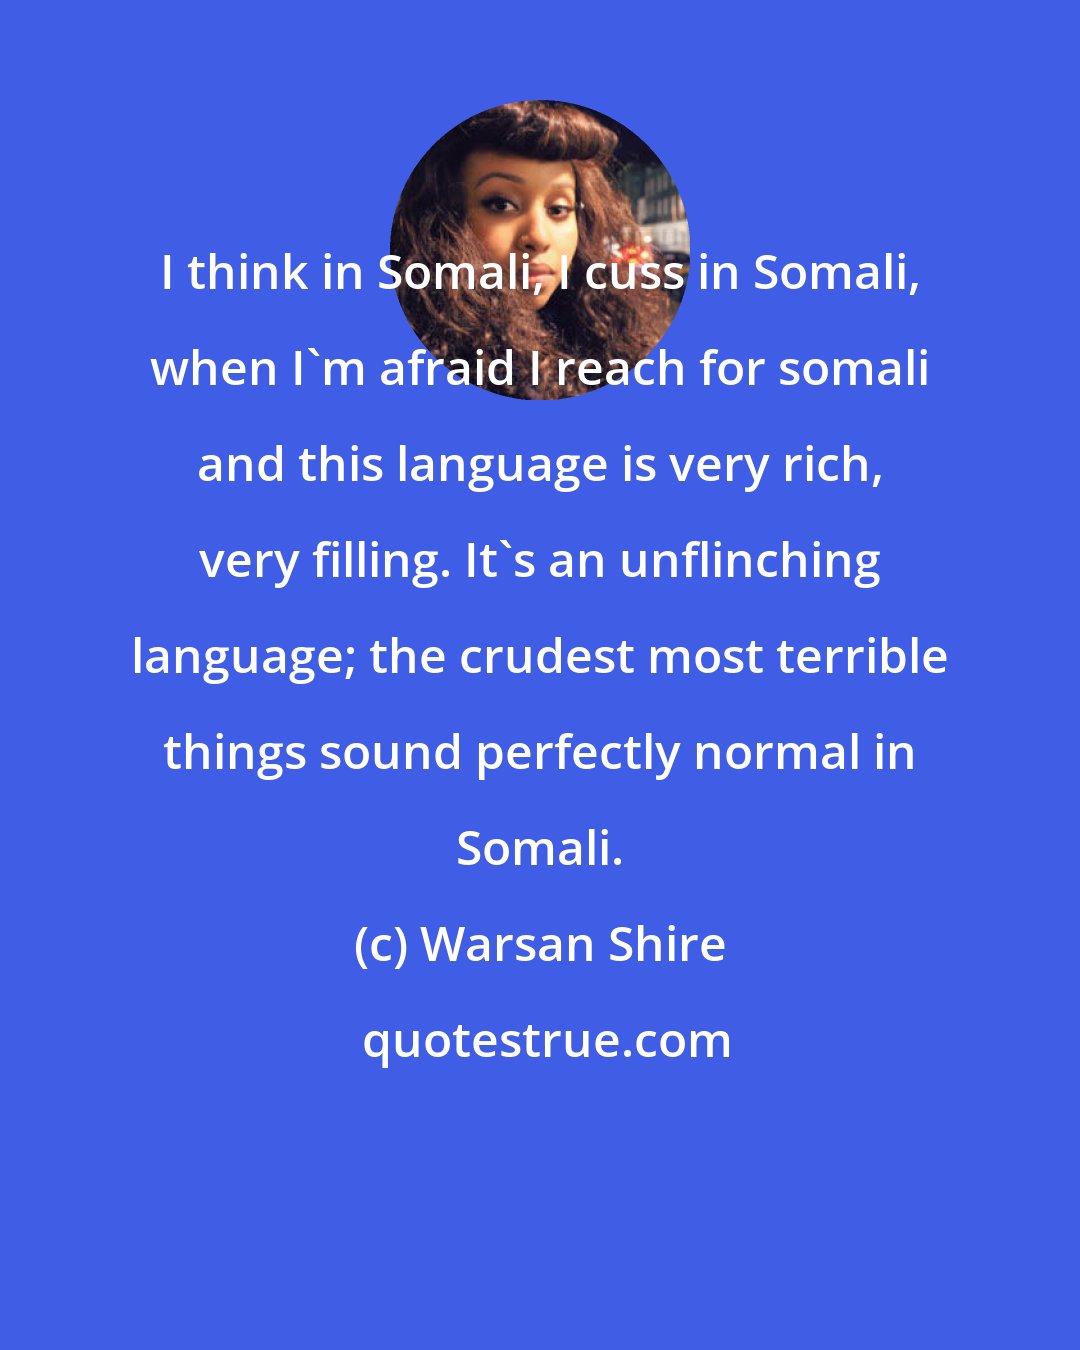 Warsan Shire: I think in Somali, I cuss in Somali, when I'm afraid I reach for somali and this language is very rich, very filling. It's an unflinching language; the crudest most terrible things sound perfectly normal in Somali.